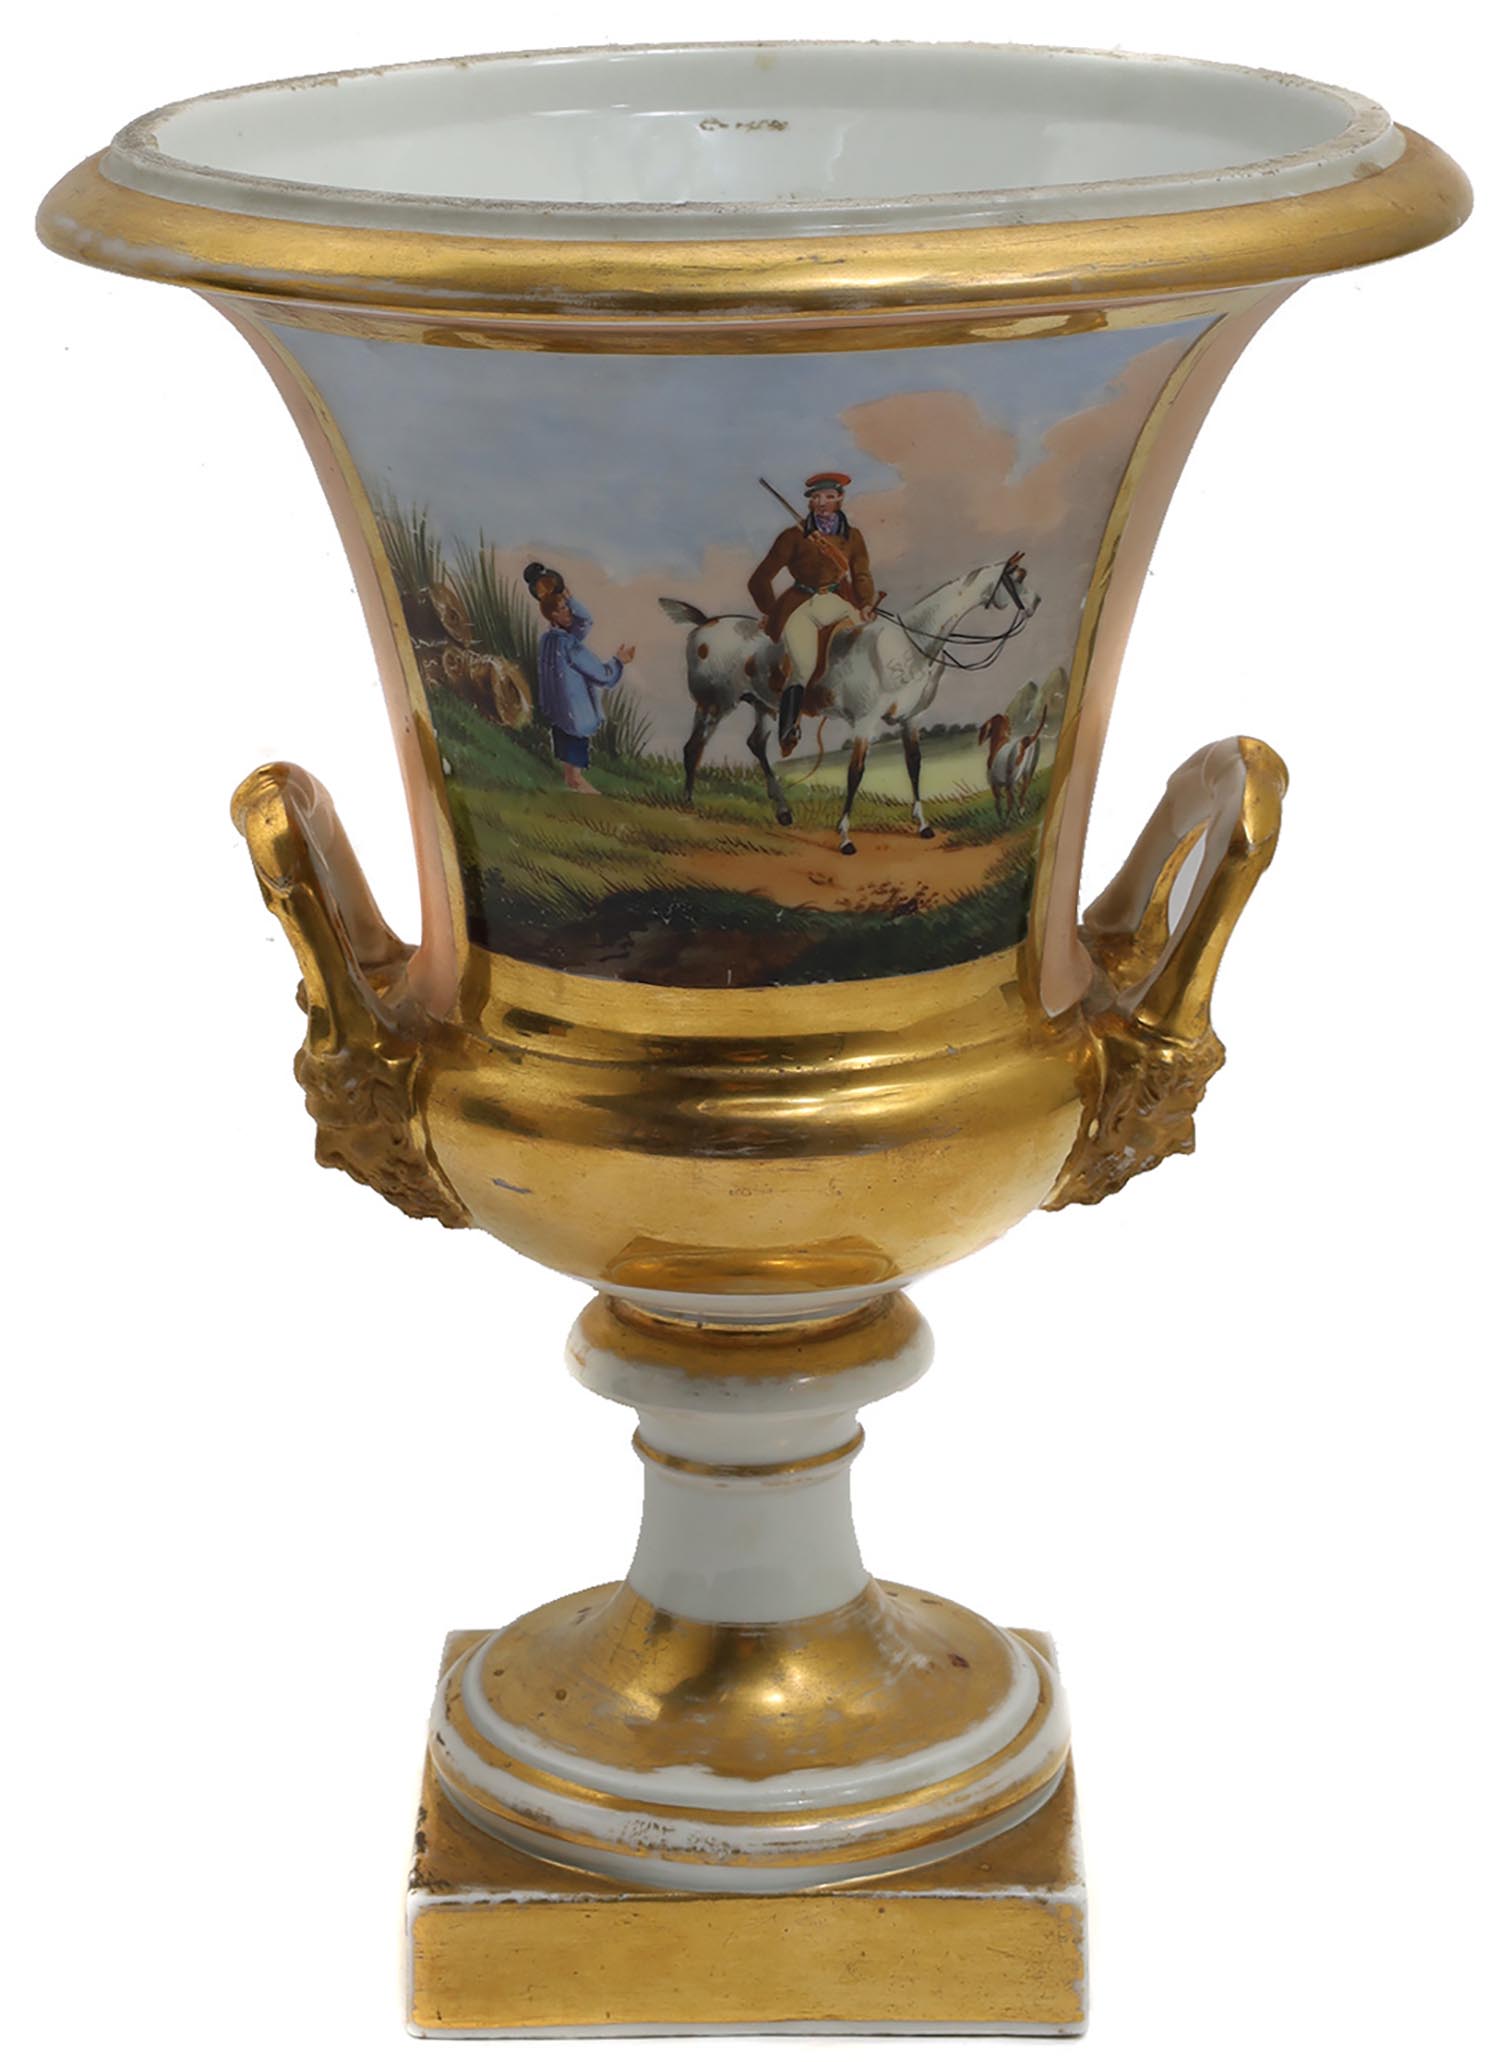 A VIENNA PORCELAIN CRATER VASE 19 C. WITH RUSSIAN COSSACKS PIC-0